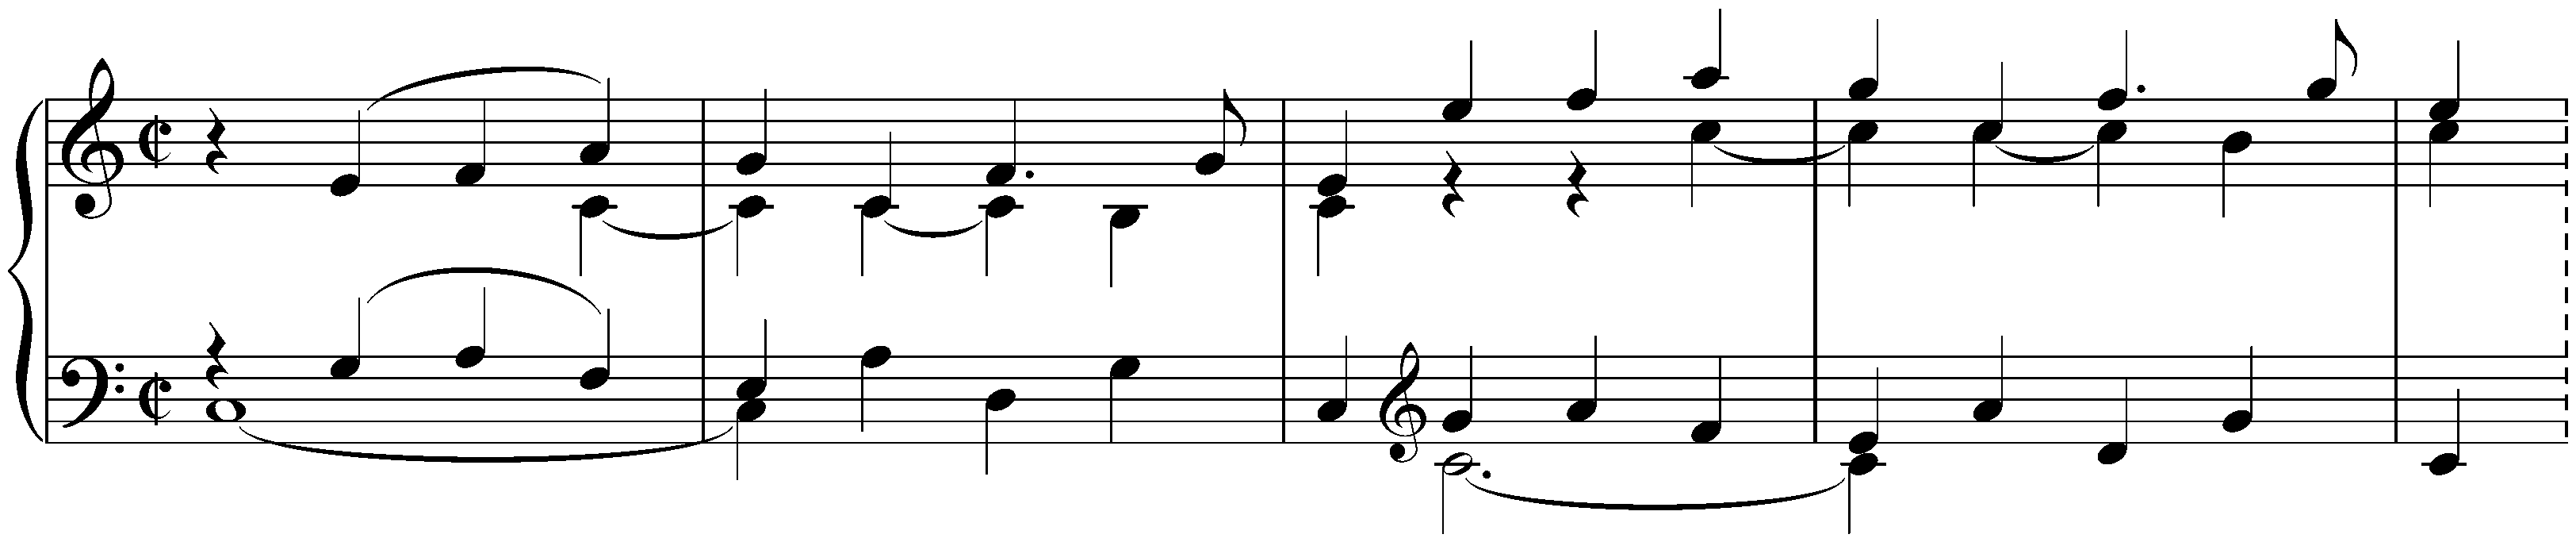 Two Preludes, op. 39; 2.